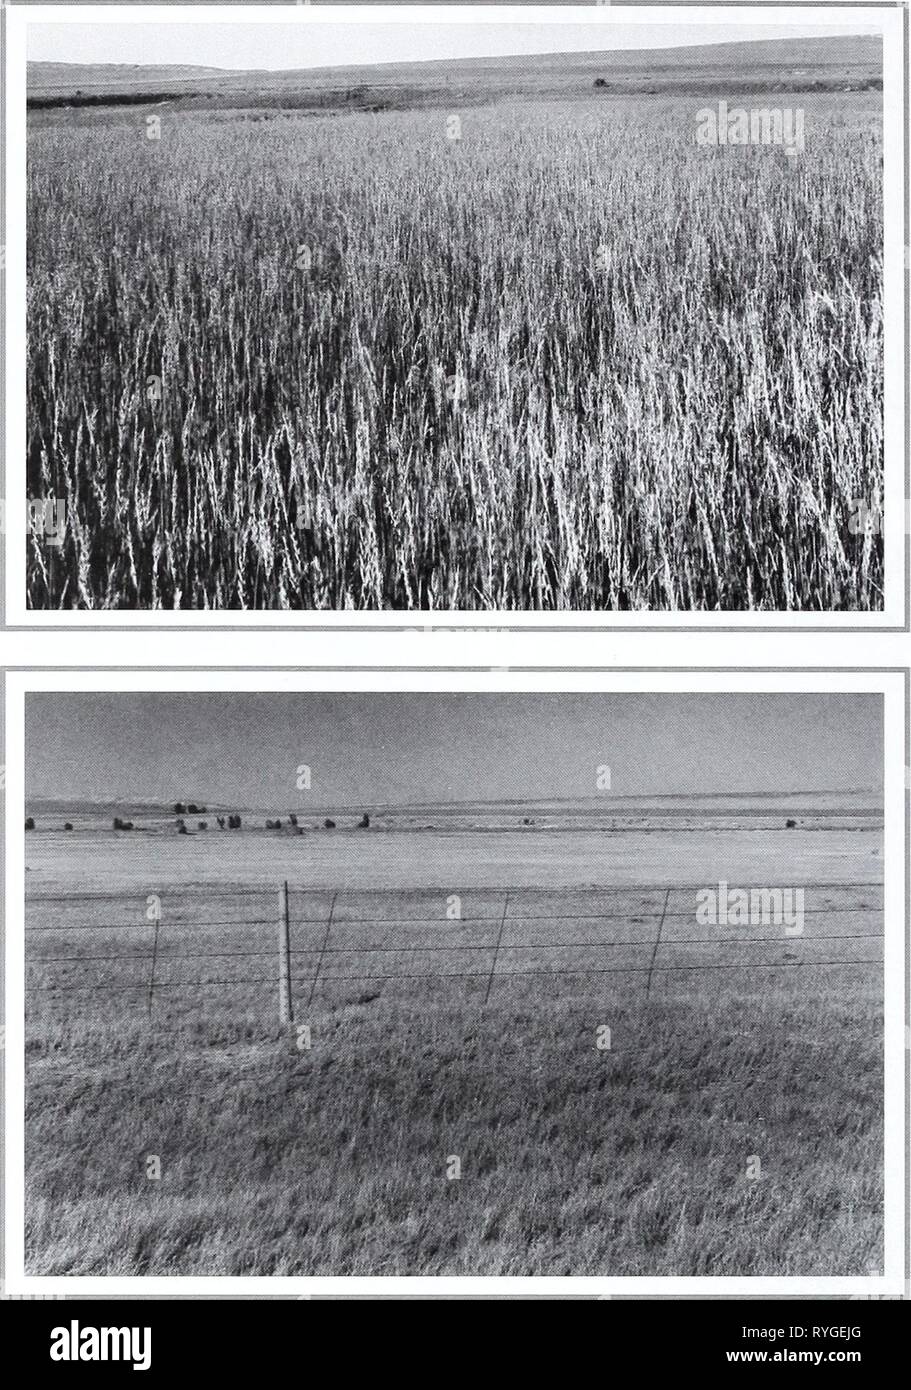 Eighty years of vegetation and landscape changes in the Northern Great Plains : a photographic record  eightyyearsofveg45klem Year: 2001  Original Photograph July 6, 1927. Shantz V-3-1927. Facing east. First Retake and Description August 11, 1960. W.S.P., E-8-1960. Dr. Shantz' original picture shows an almost pure stand of Agropyron smithii. When the 1960 picture was taken there was very little of this grass, there being mainly Koeleria cristata (from Phillips 1963, p. 129). Second Retake August 3, 1998. Kay-4358-15. Stock Photo